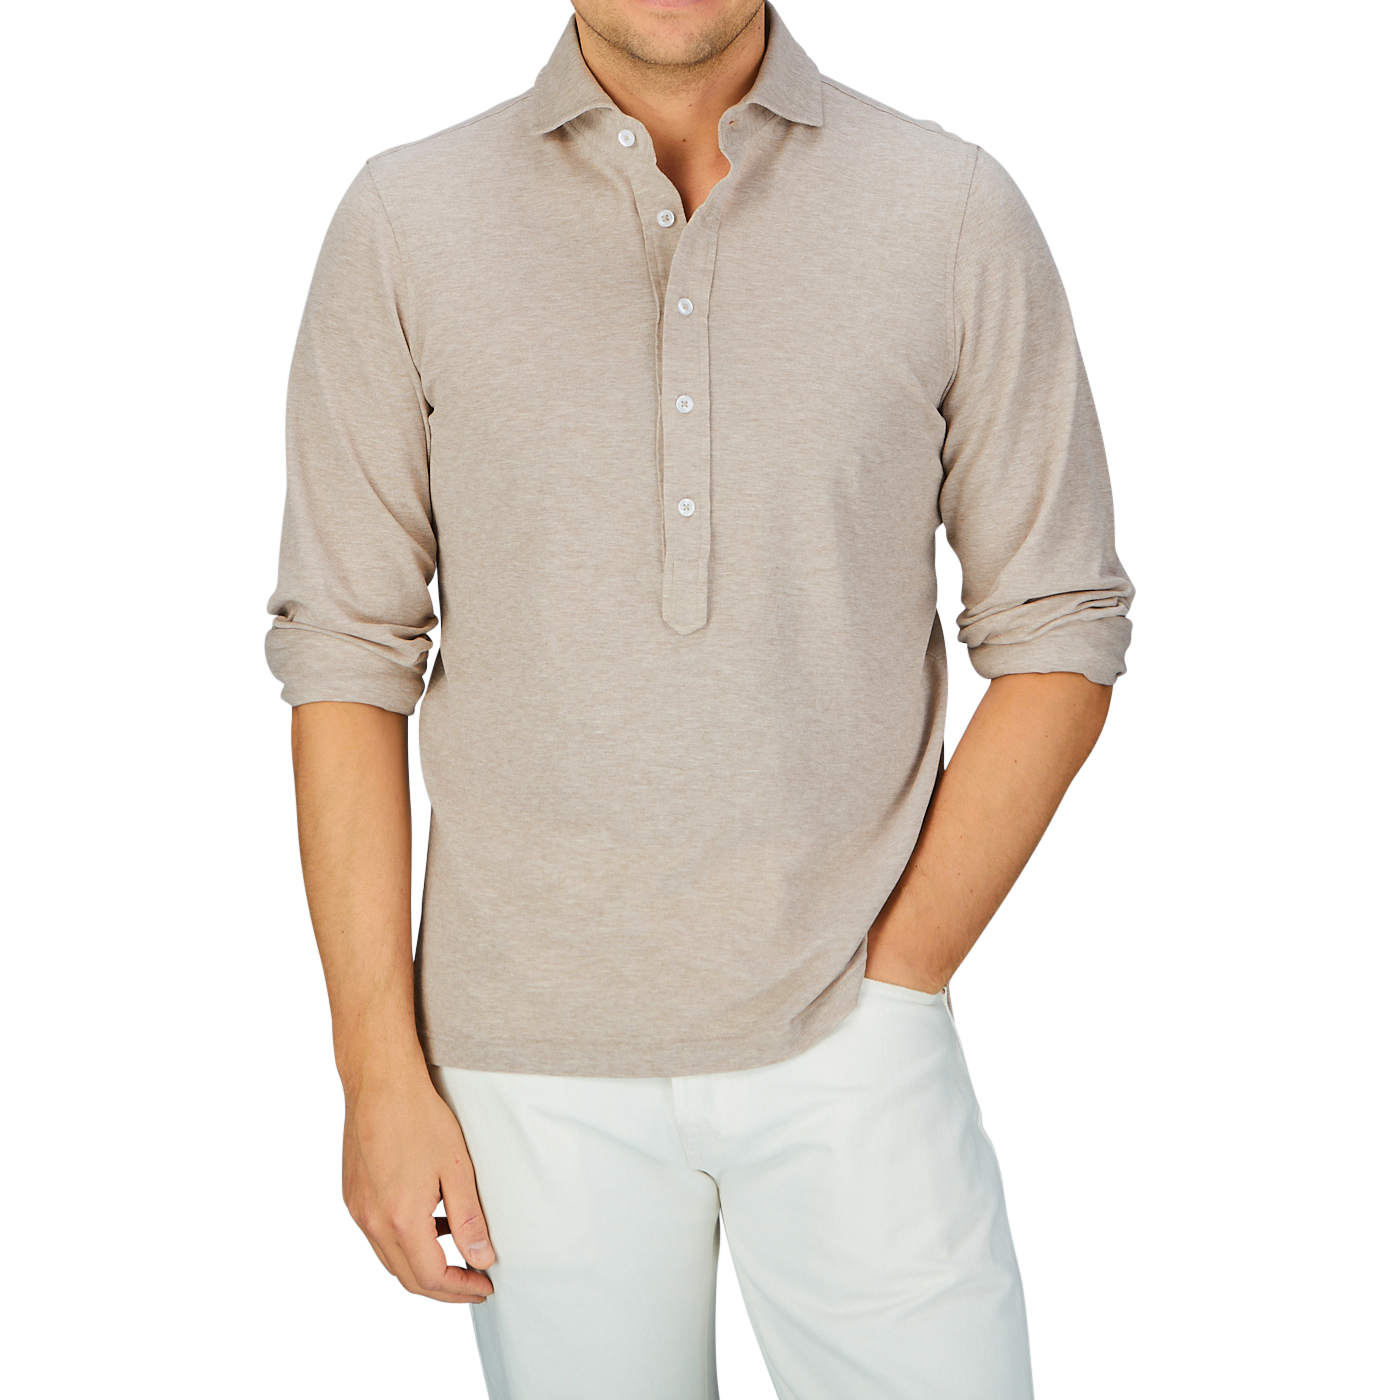 Man in a slim fit, Gran Sasso beige long-sleeve cotton jersey popover shirt and white pants.